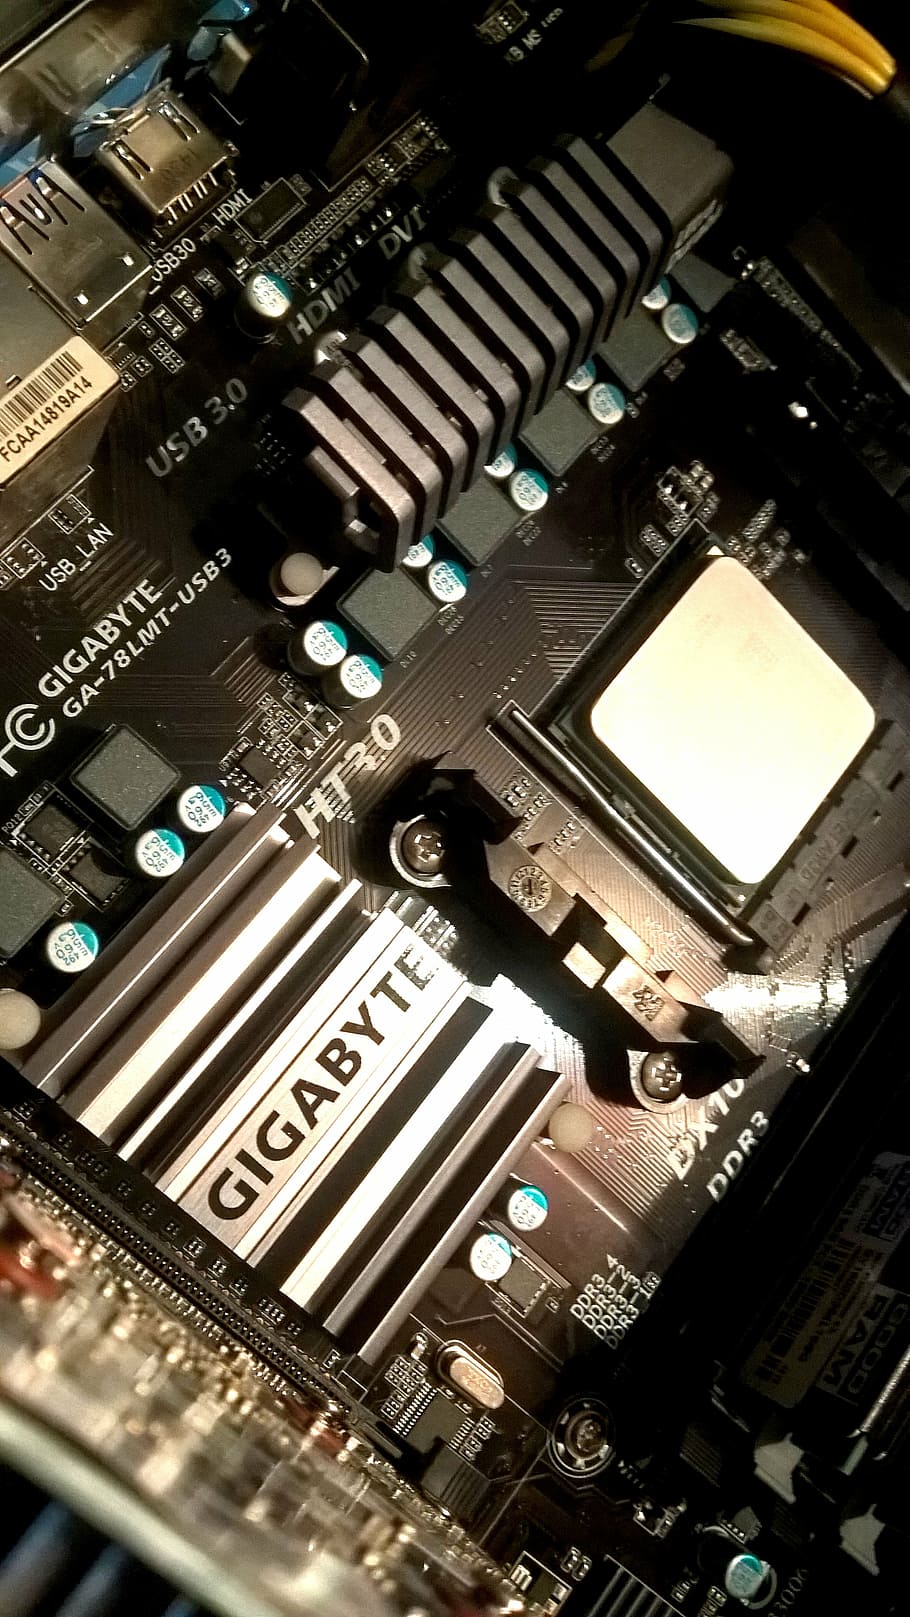 processor, pc, motherboard, computers, amd, chipset, technology